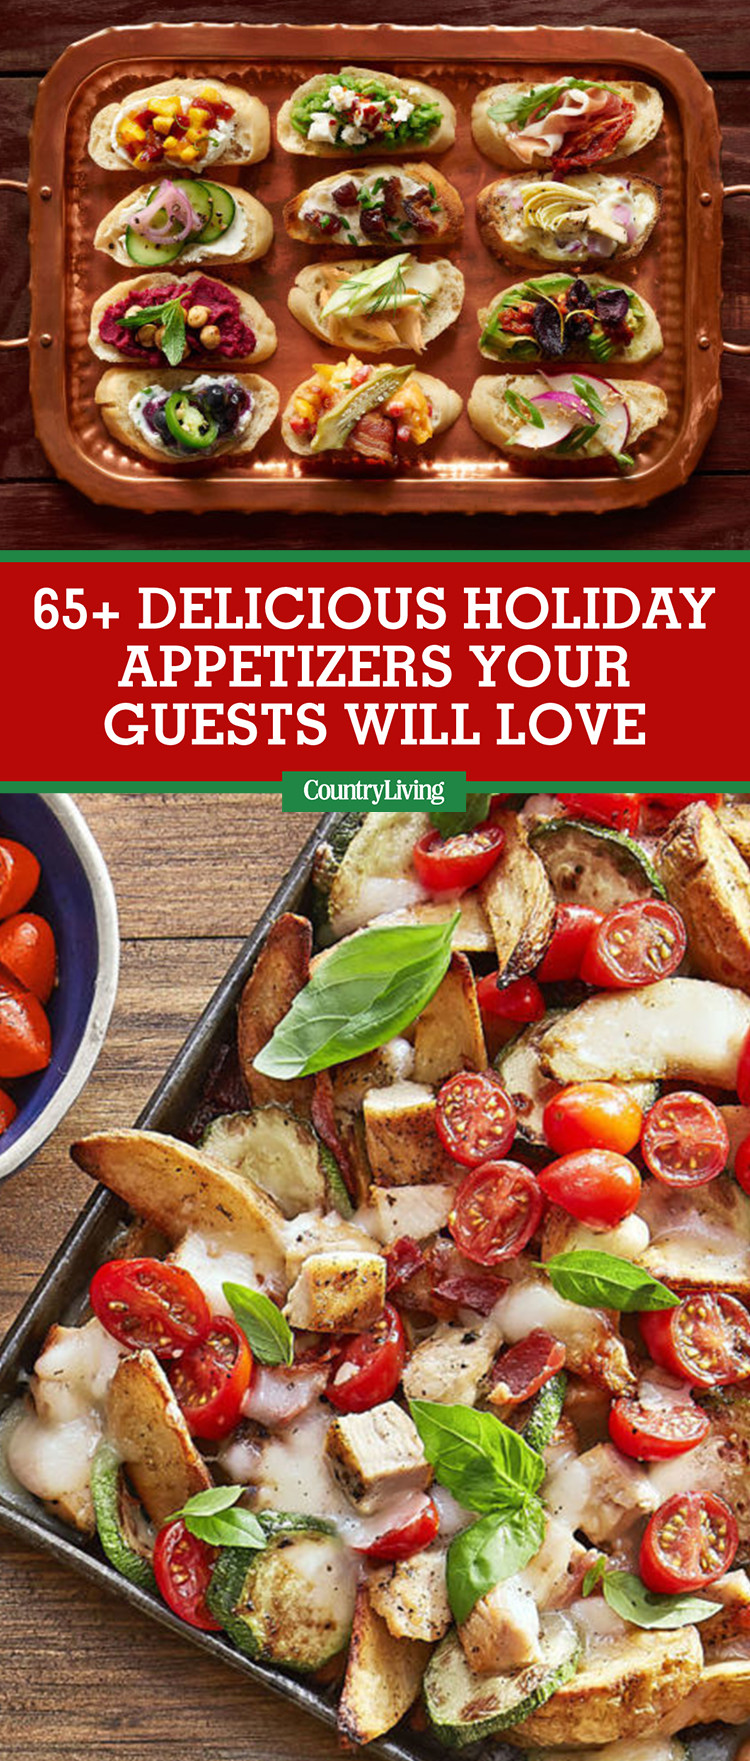 Christmas Holiday Appetizers
 60 Easy Thanksgiving and Christmas Appetizer Recipes